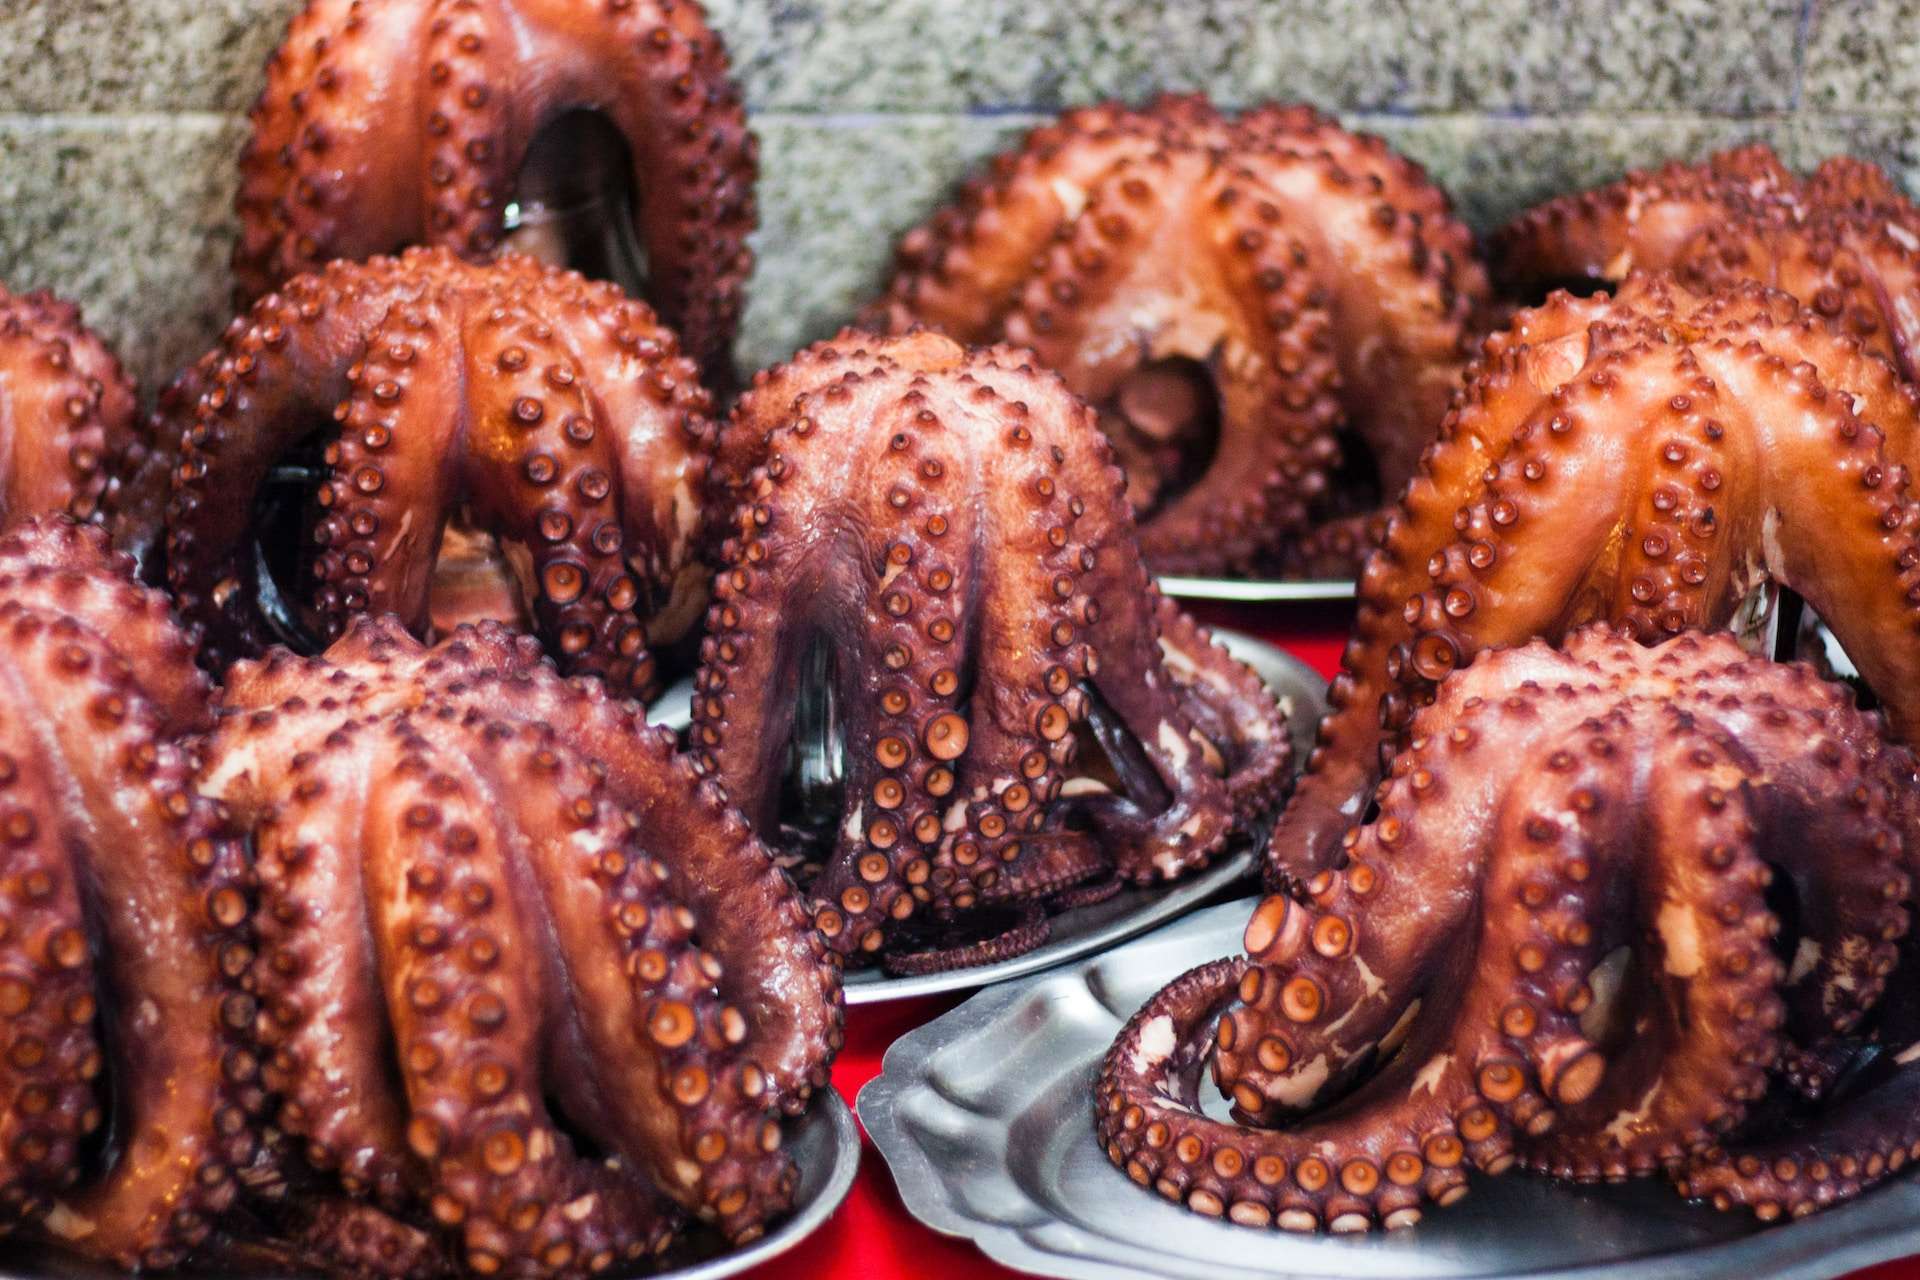 20-facts-about-octopus